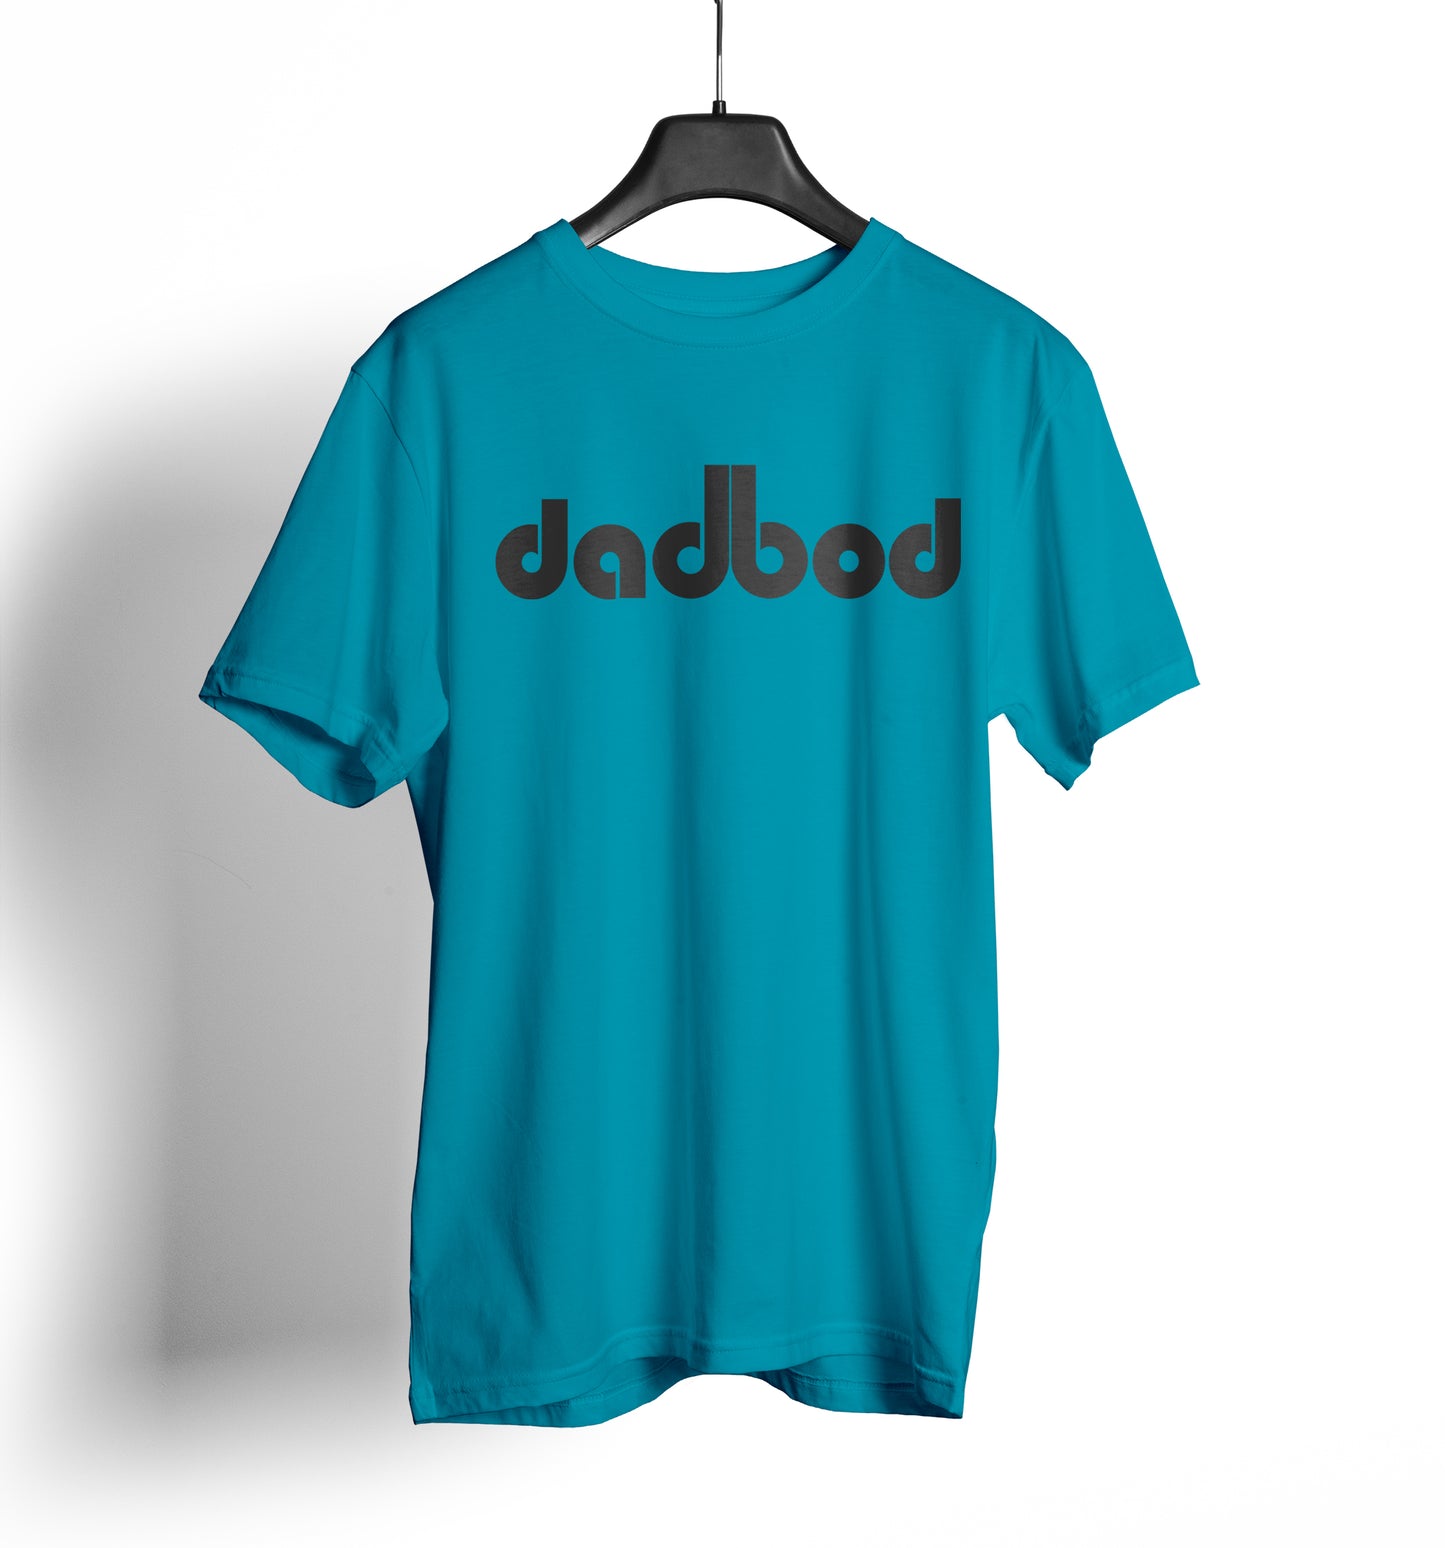 Dirty Bags Cornhole "dadbod" - Turquoise and Black